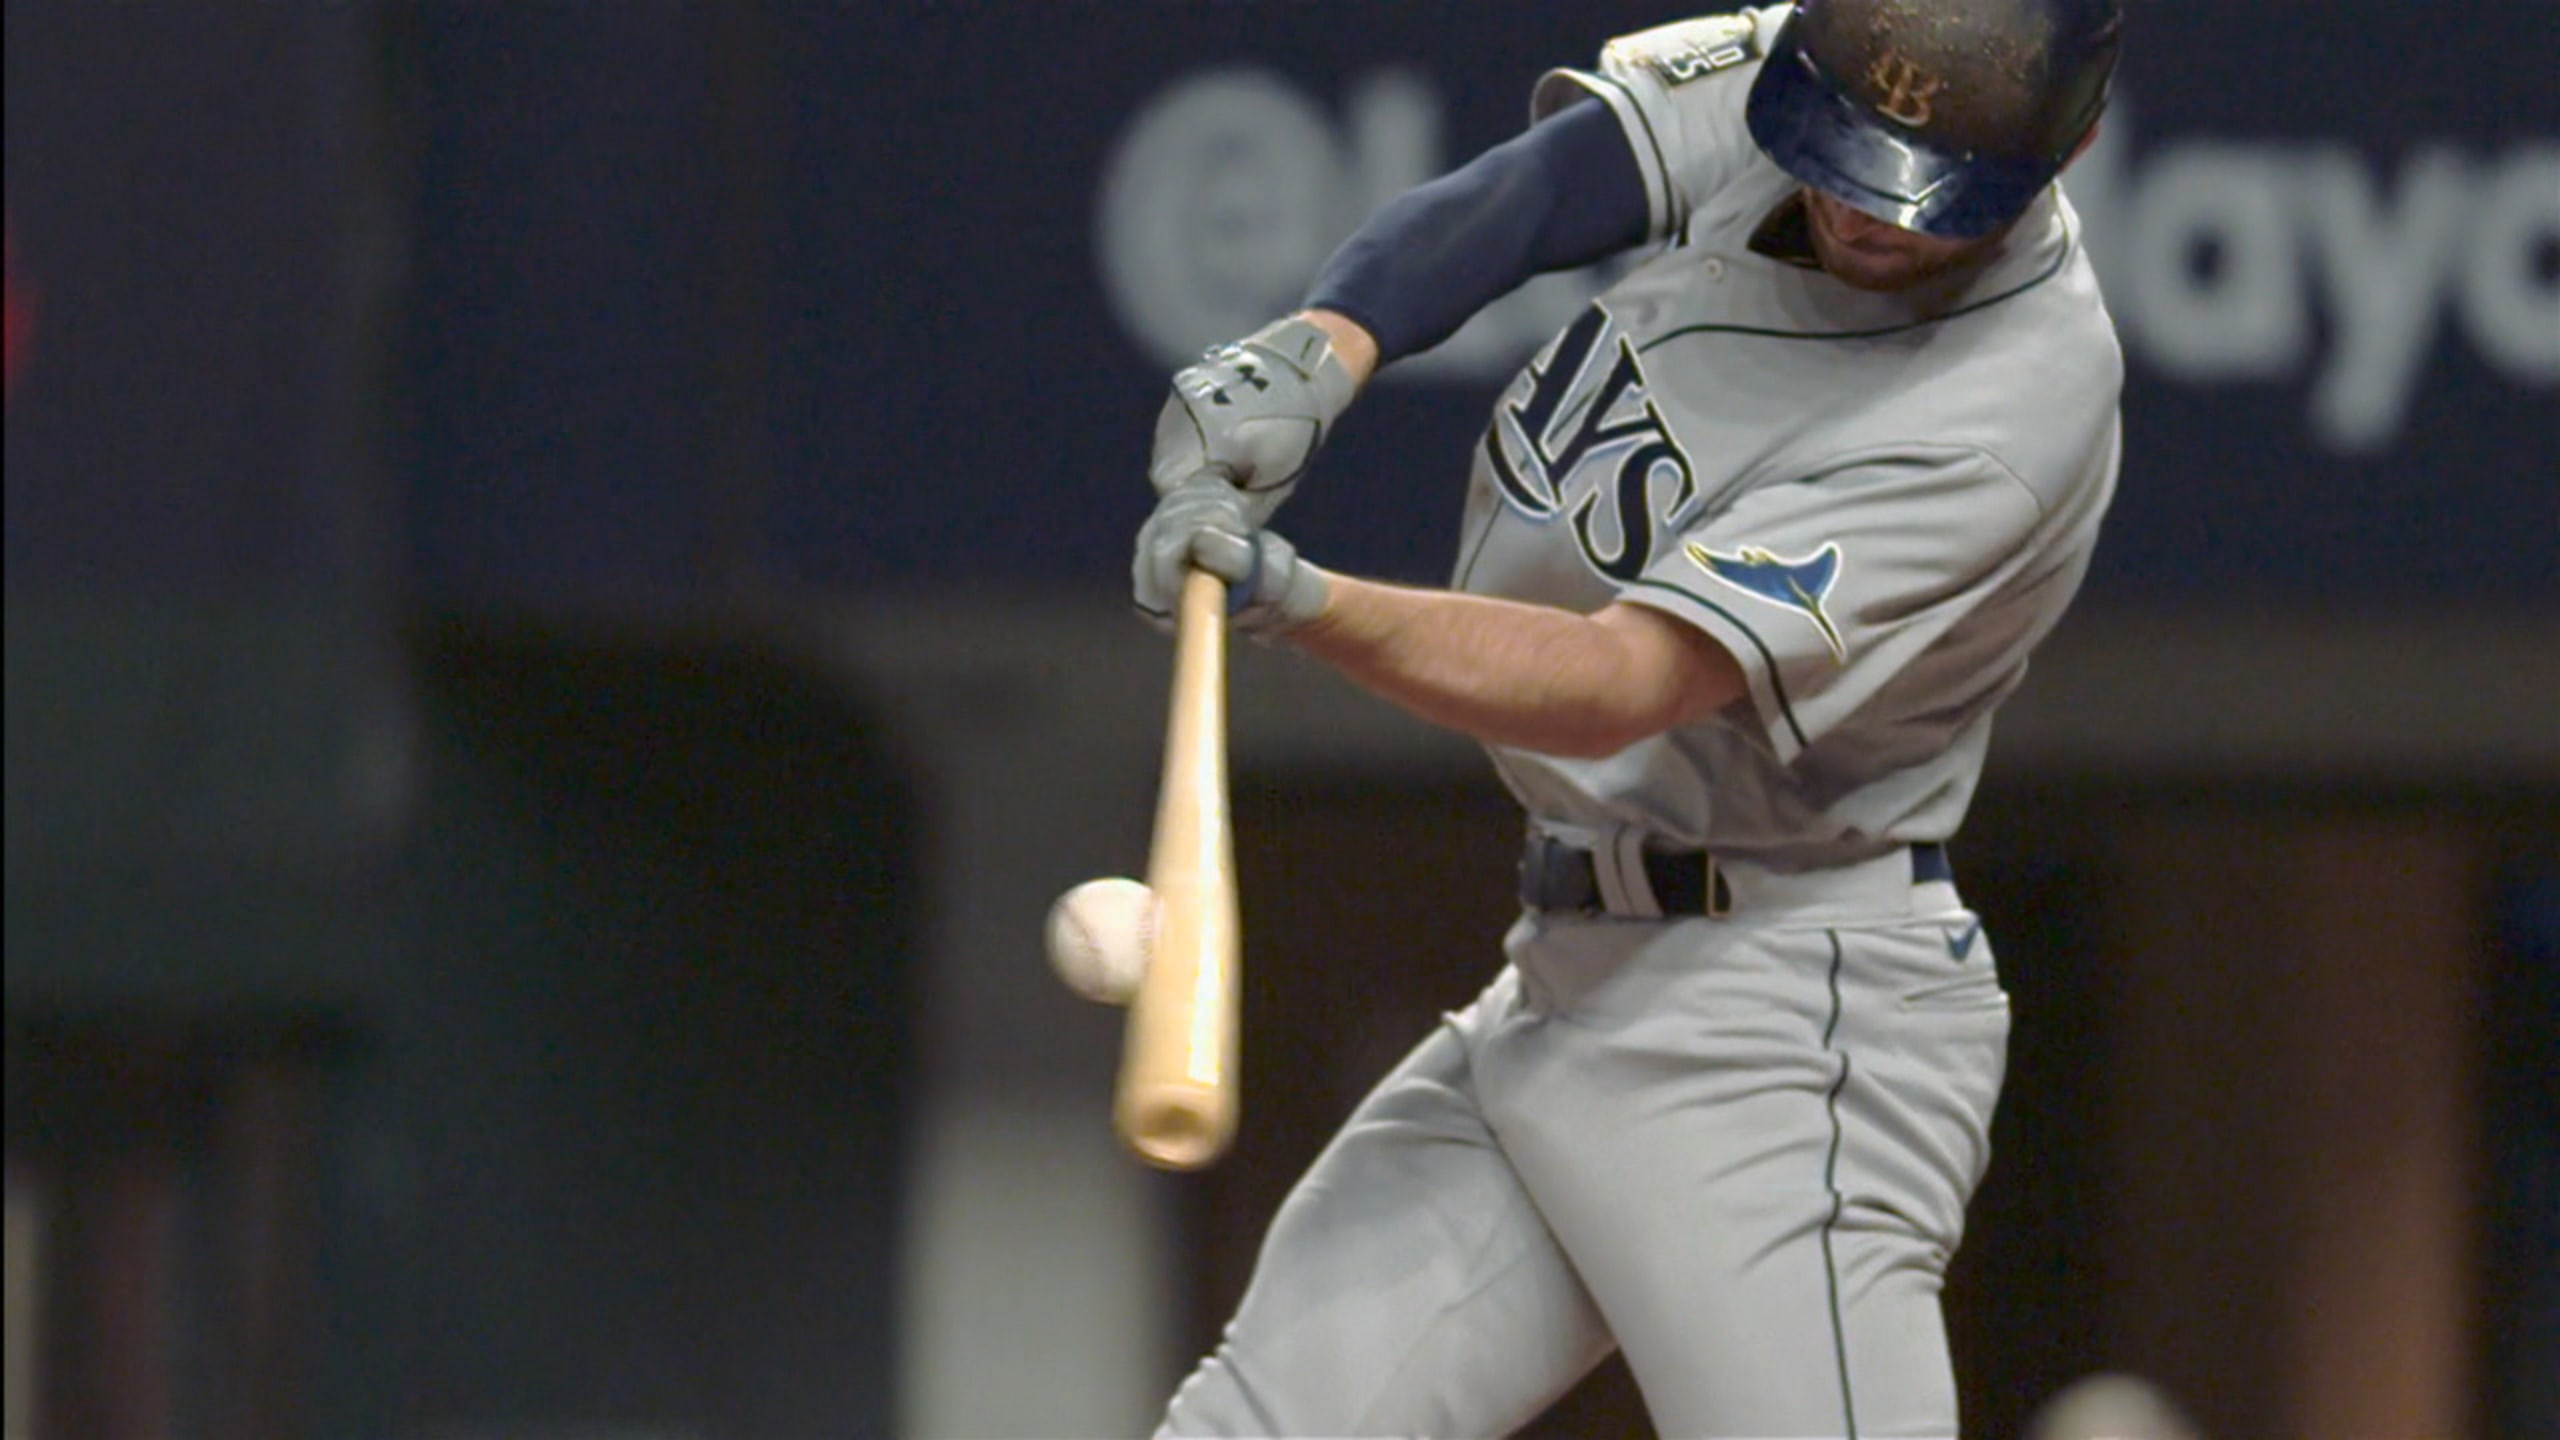 Brandon Lowe belts 2 homers as Rays win Game 2 of World Series